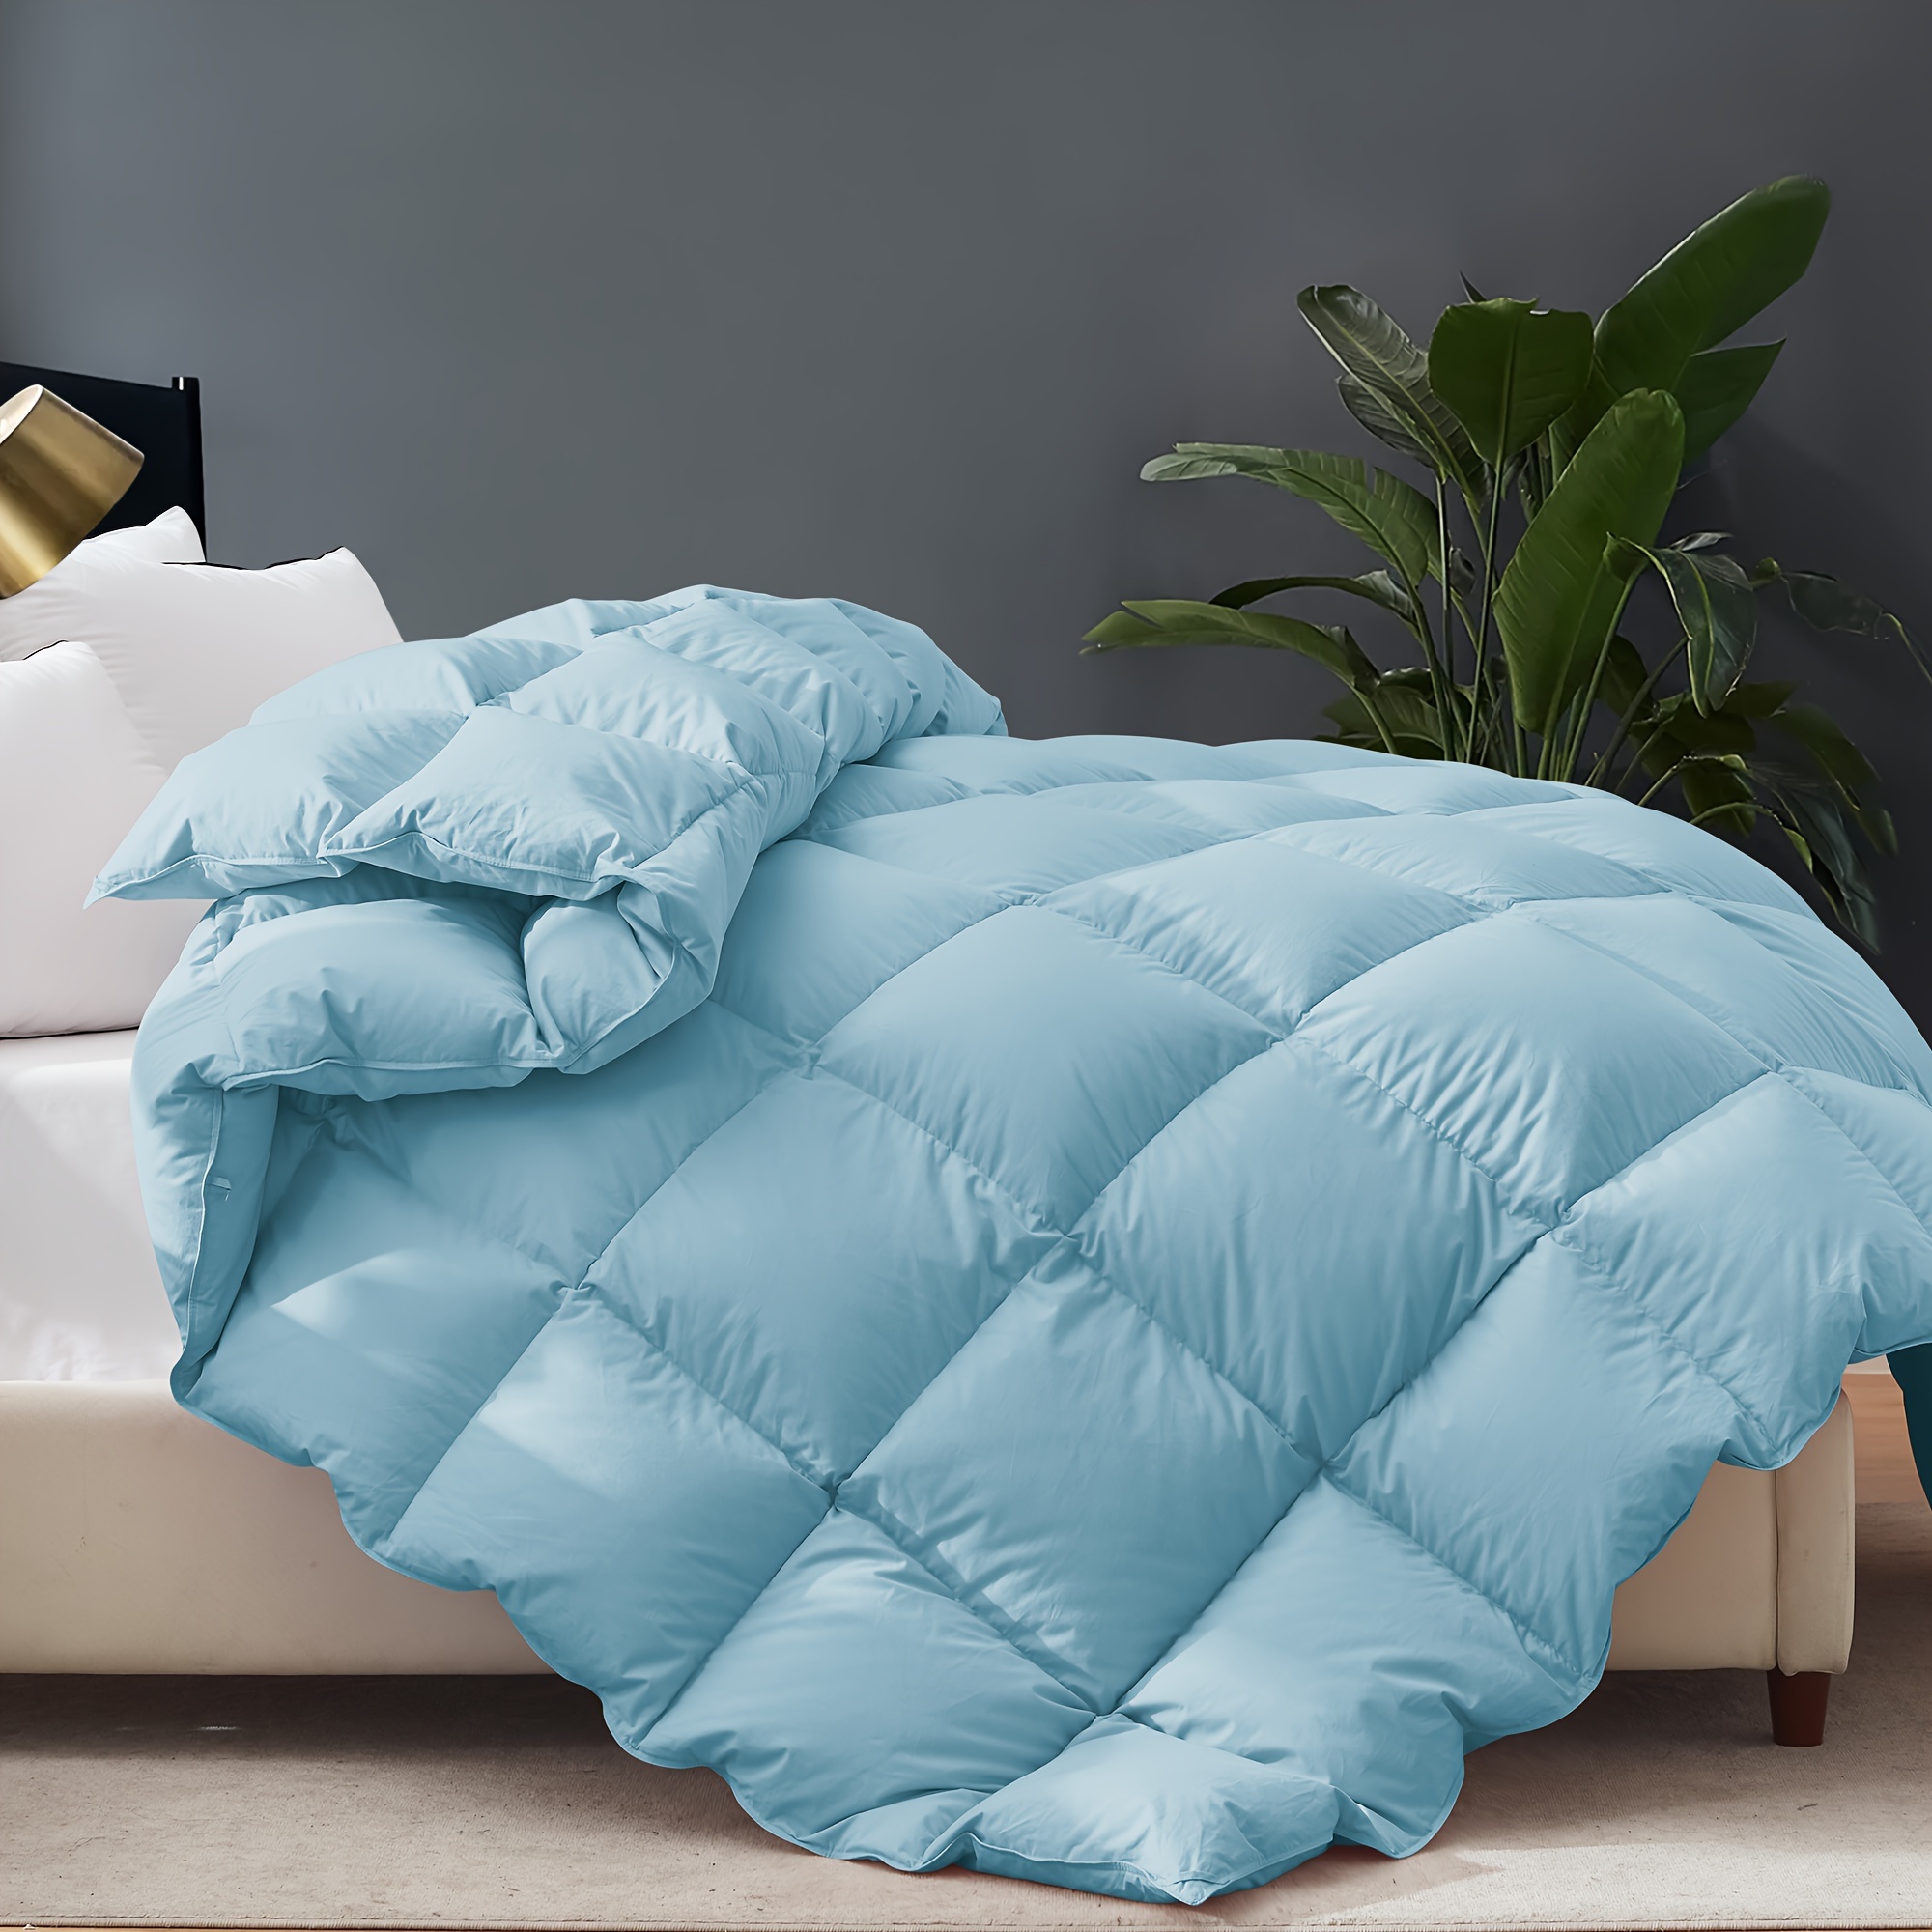 

Cosybay Goose Down Comforter Queen Size, Fluffy Feather Down Duvet Insert Queen, All Season 100% Cotton Cover Luxury Hotel Bed Comforter With Corner Tabs (blue, 90"x90")